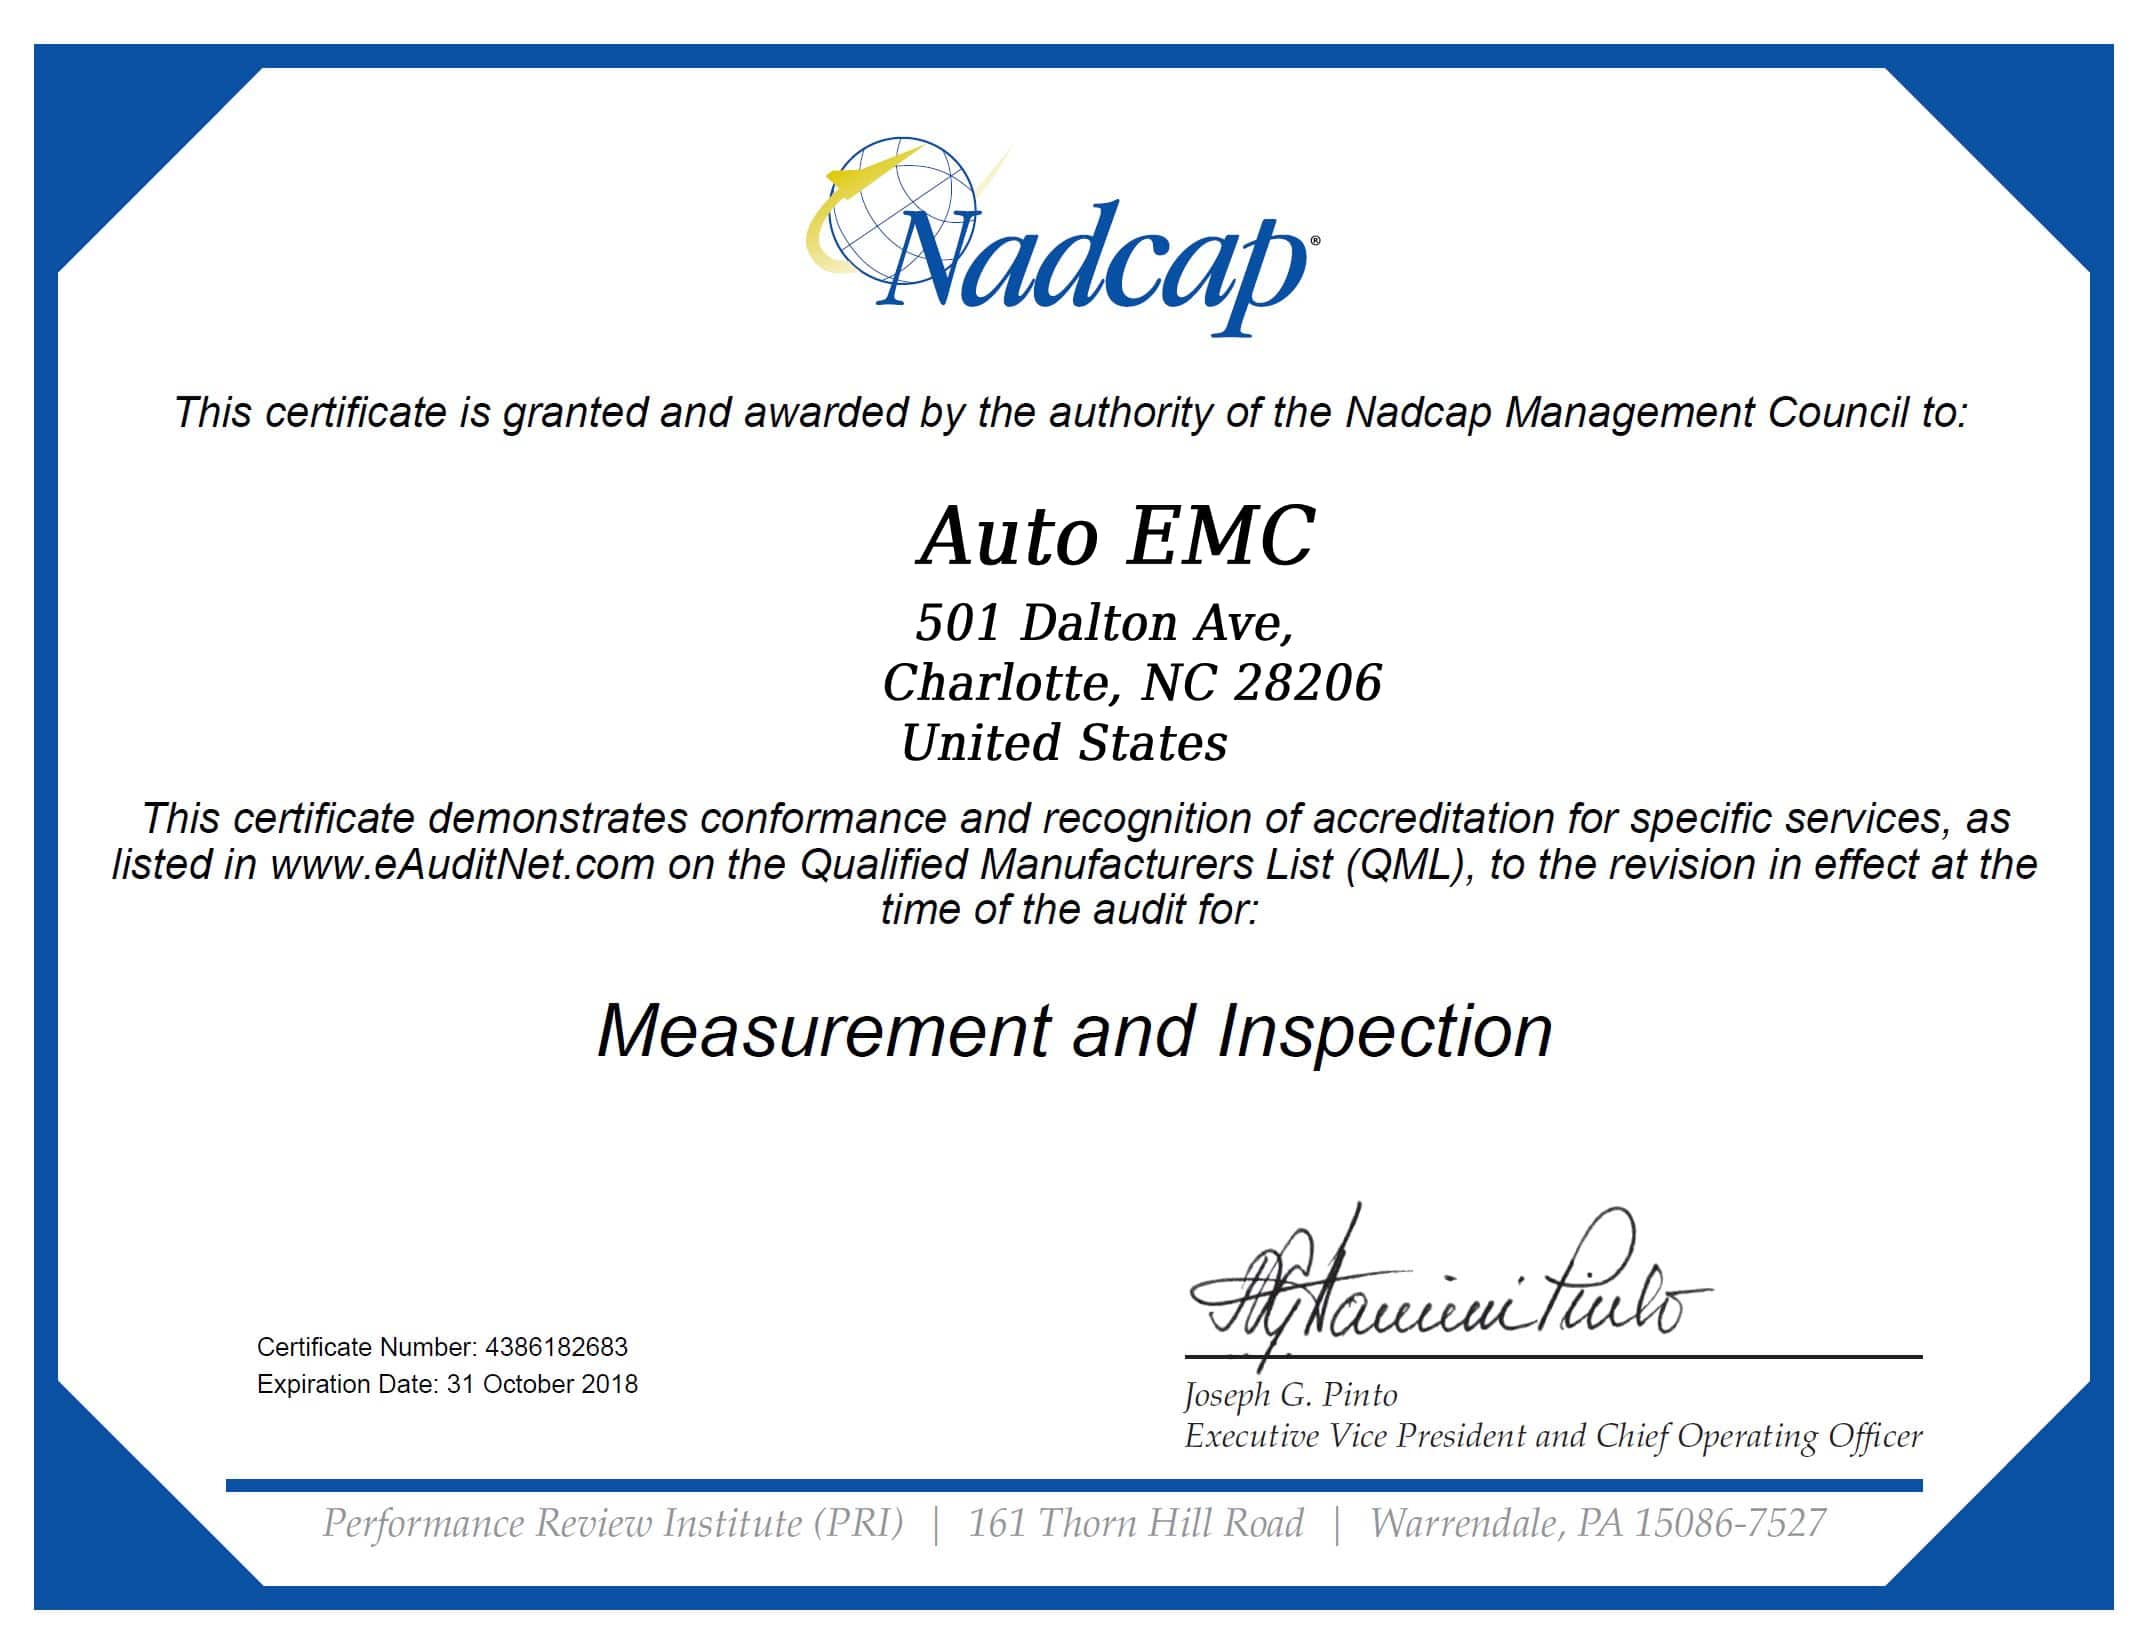 Manufacturer-Specific Certifications of Auto EMC